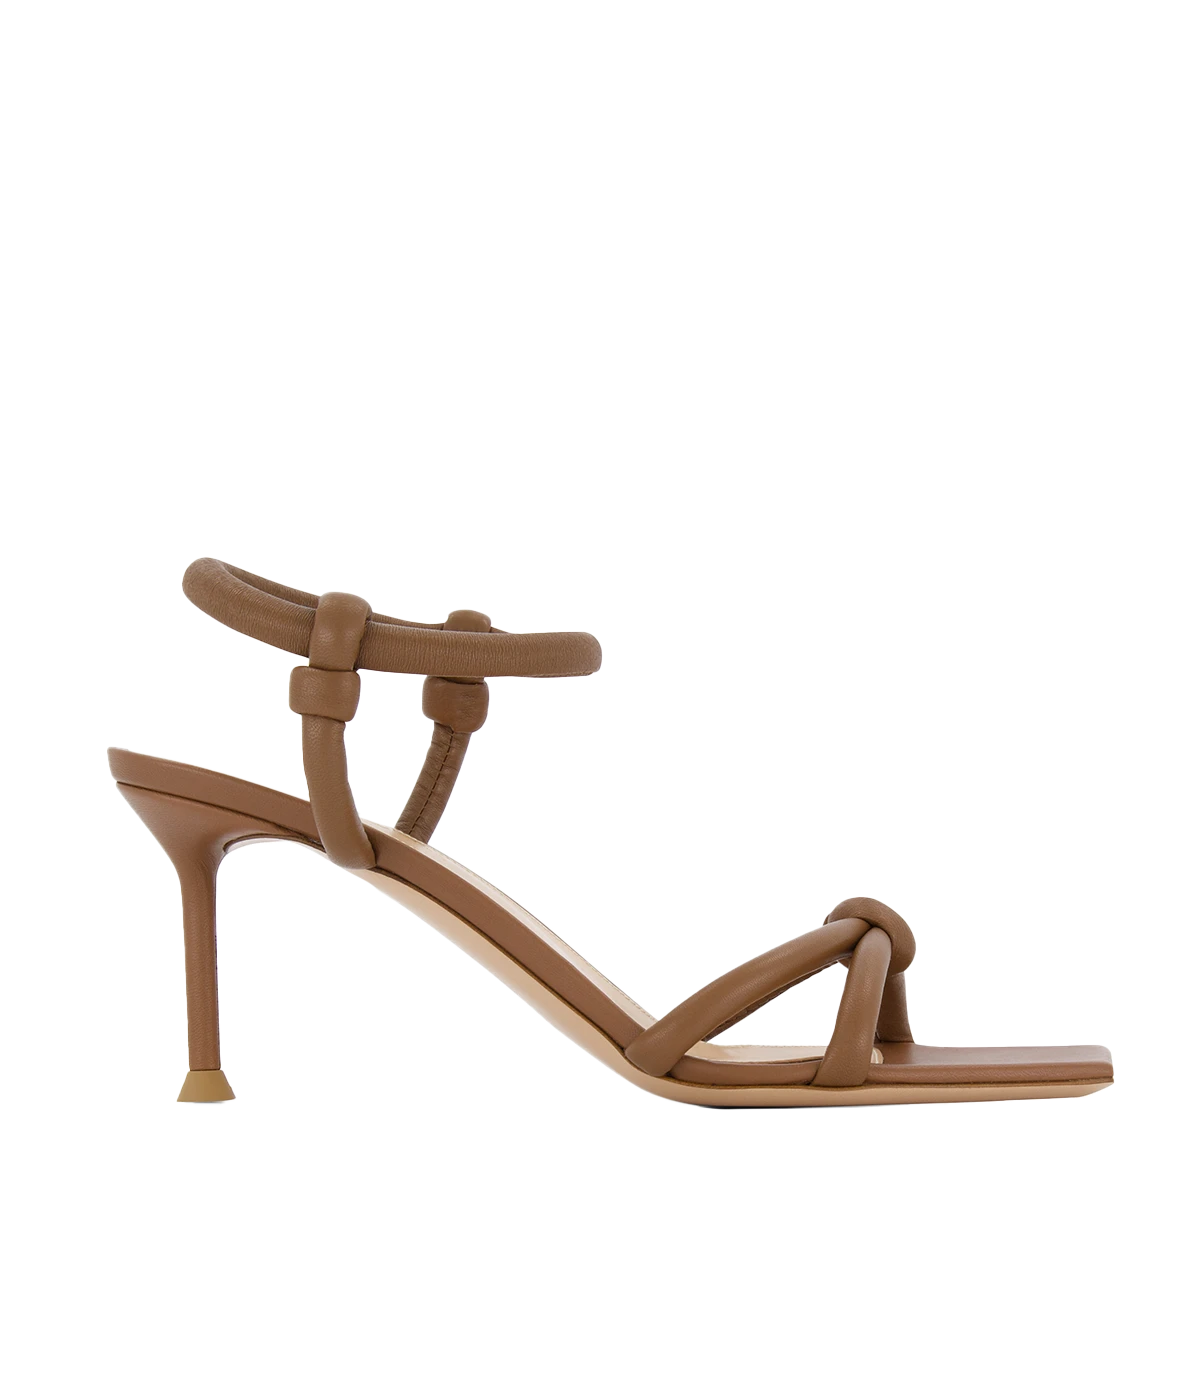 Juno Leather Sandal in Cuoio